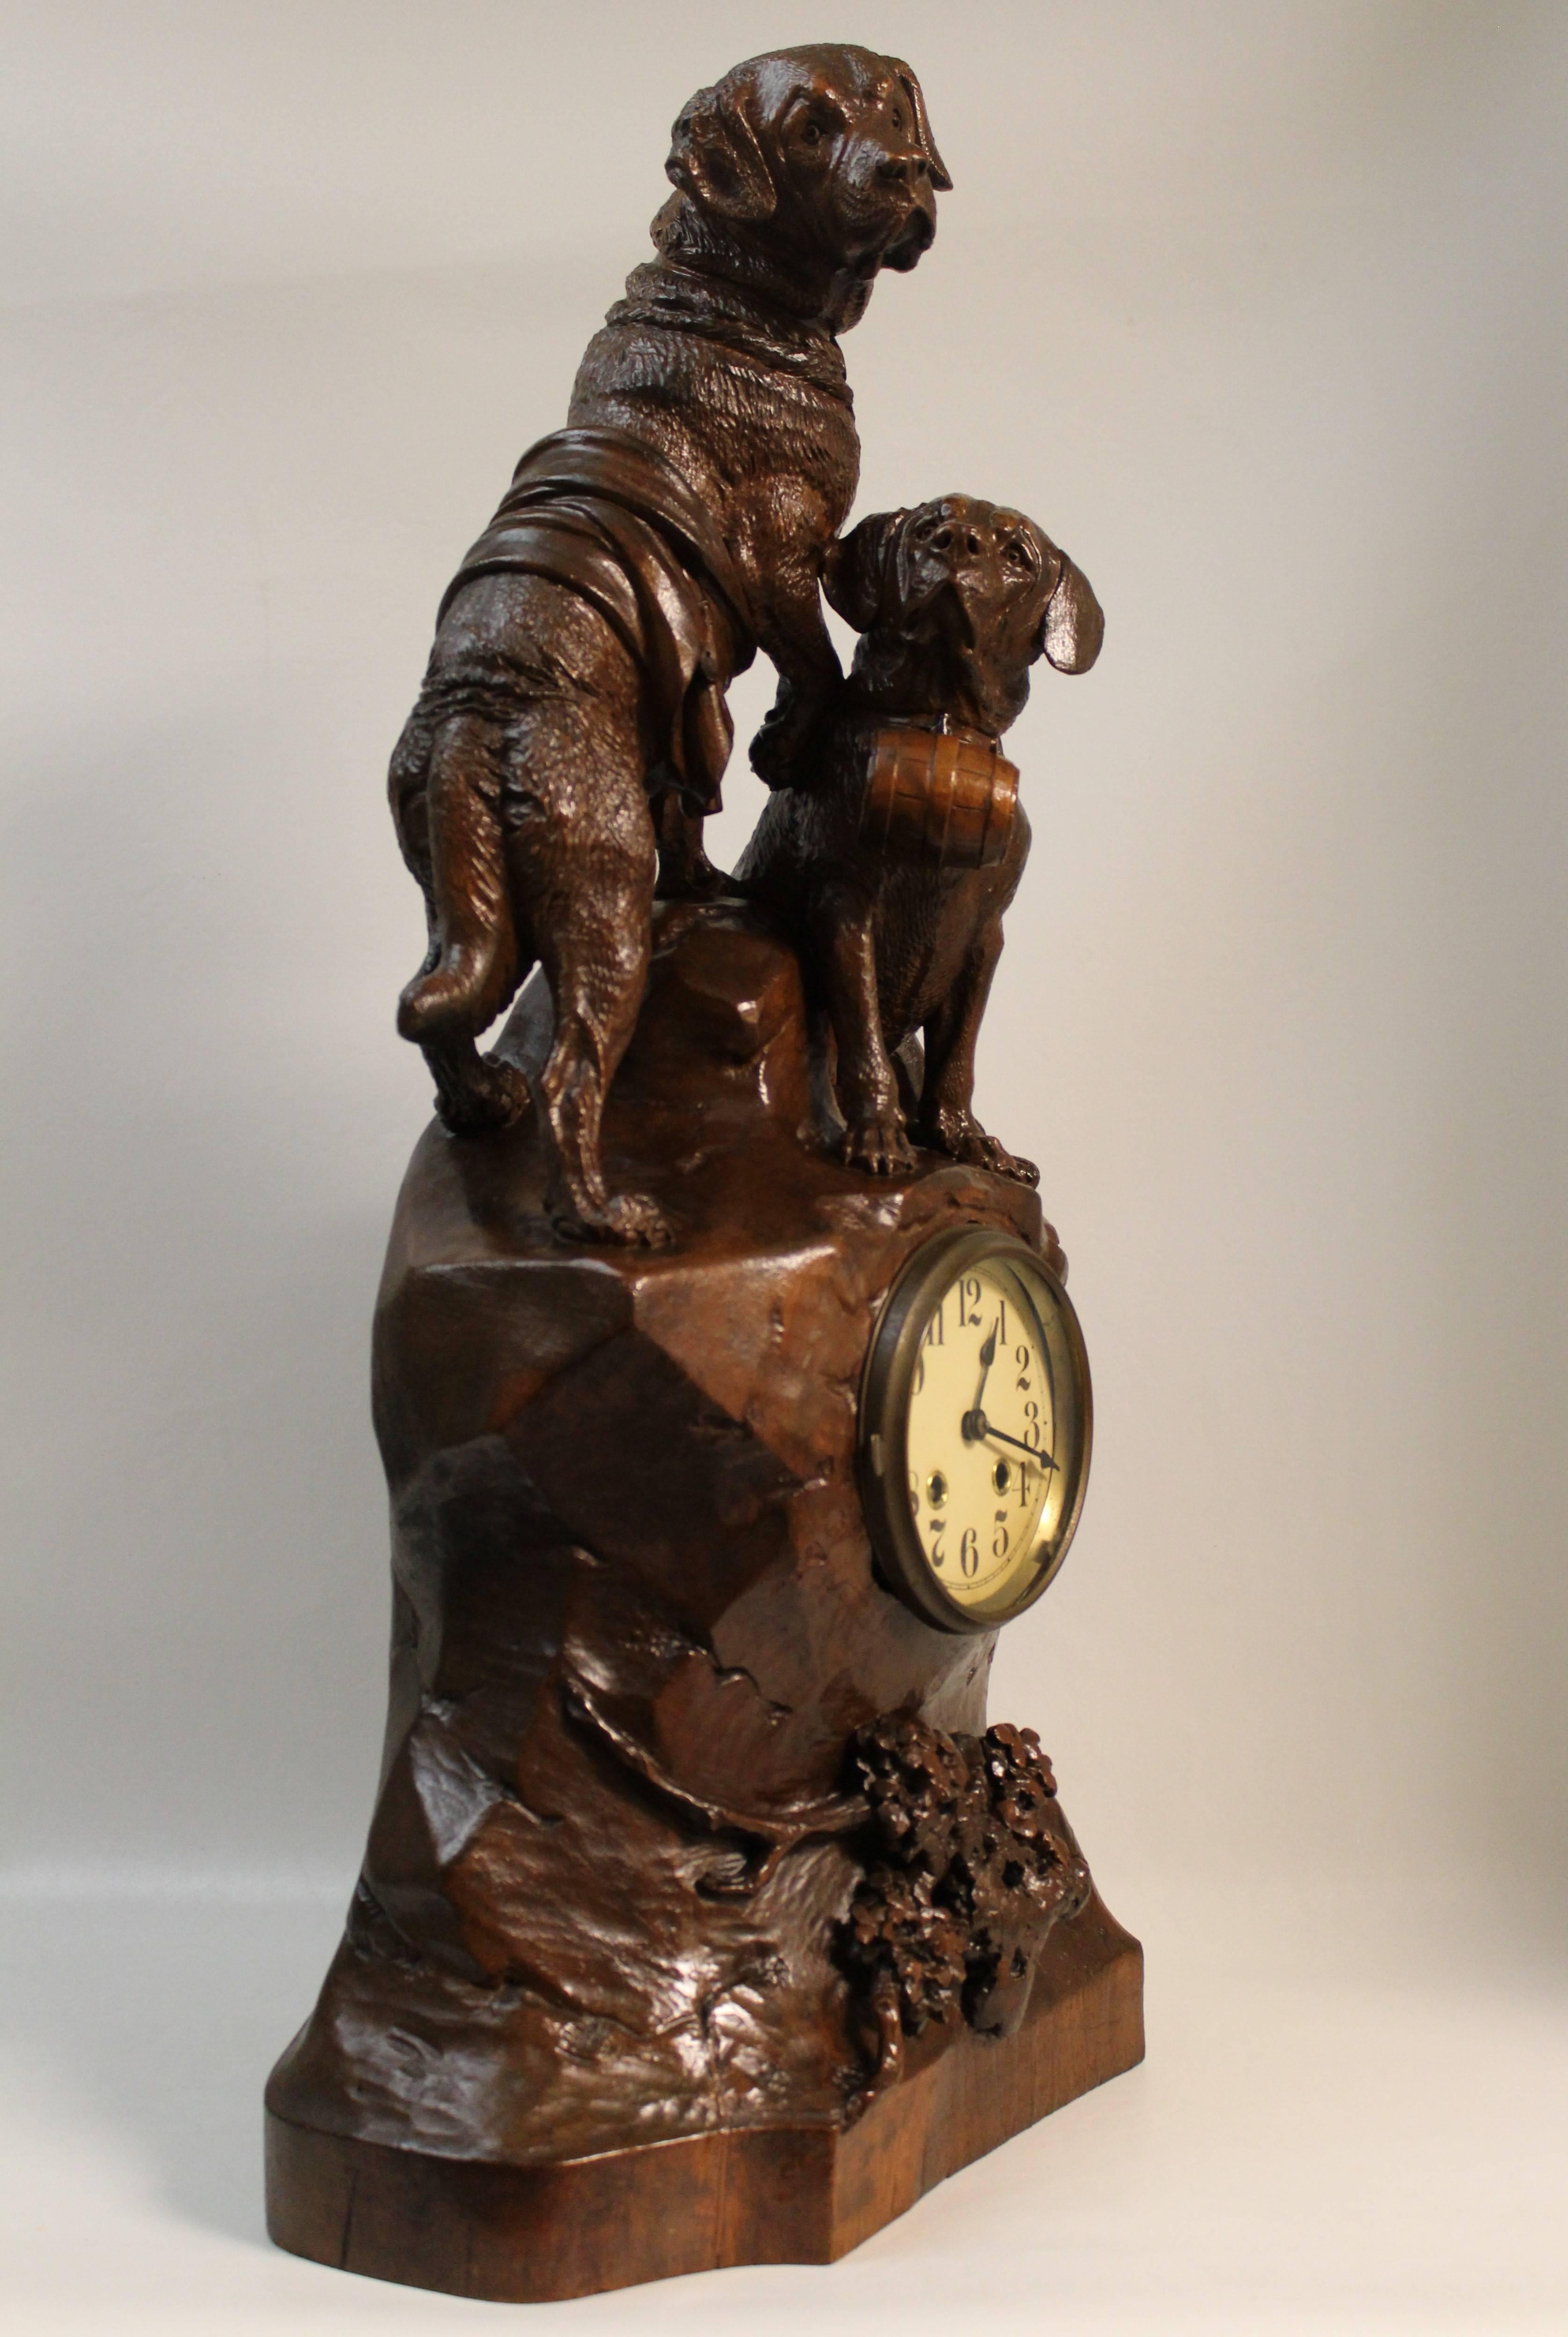 An excellent quality 19th century Swiss Black Forest carved mantel clock hand-carved of Linden wood. Very well executed with traditional theme of life saving St. Bernard dogs carrying whisky barrels above carved rocks and plants. The clock is fully